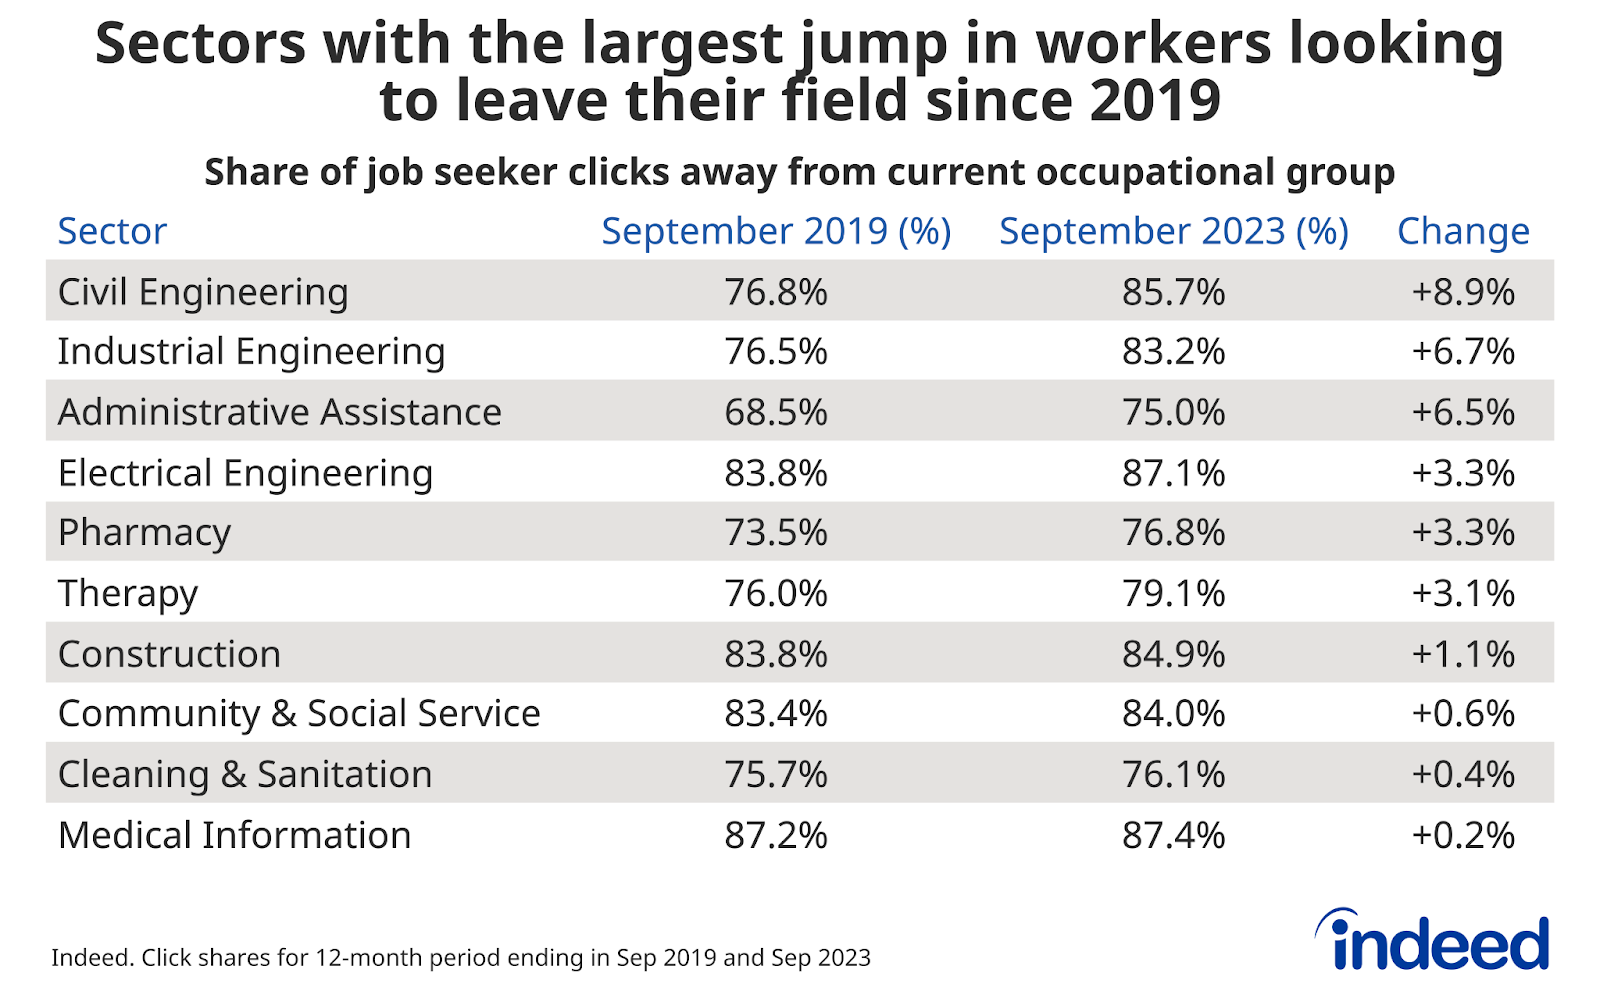 A table titled “Sectors with the largest jump in workers looking to leave their field since 2019.” The table shows data on the rates at which job seekers are clicking on job postings in sectors which different from their current occupation. 